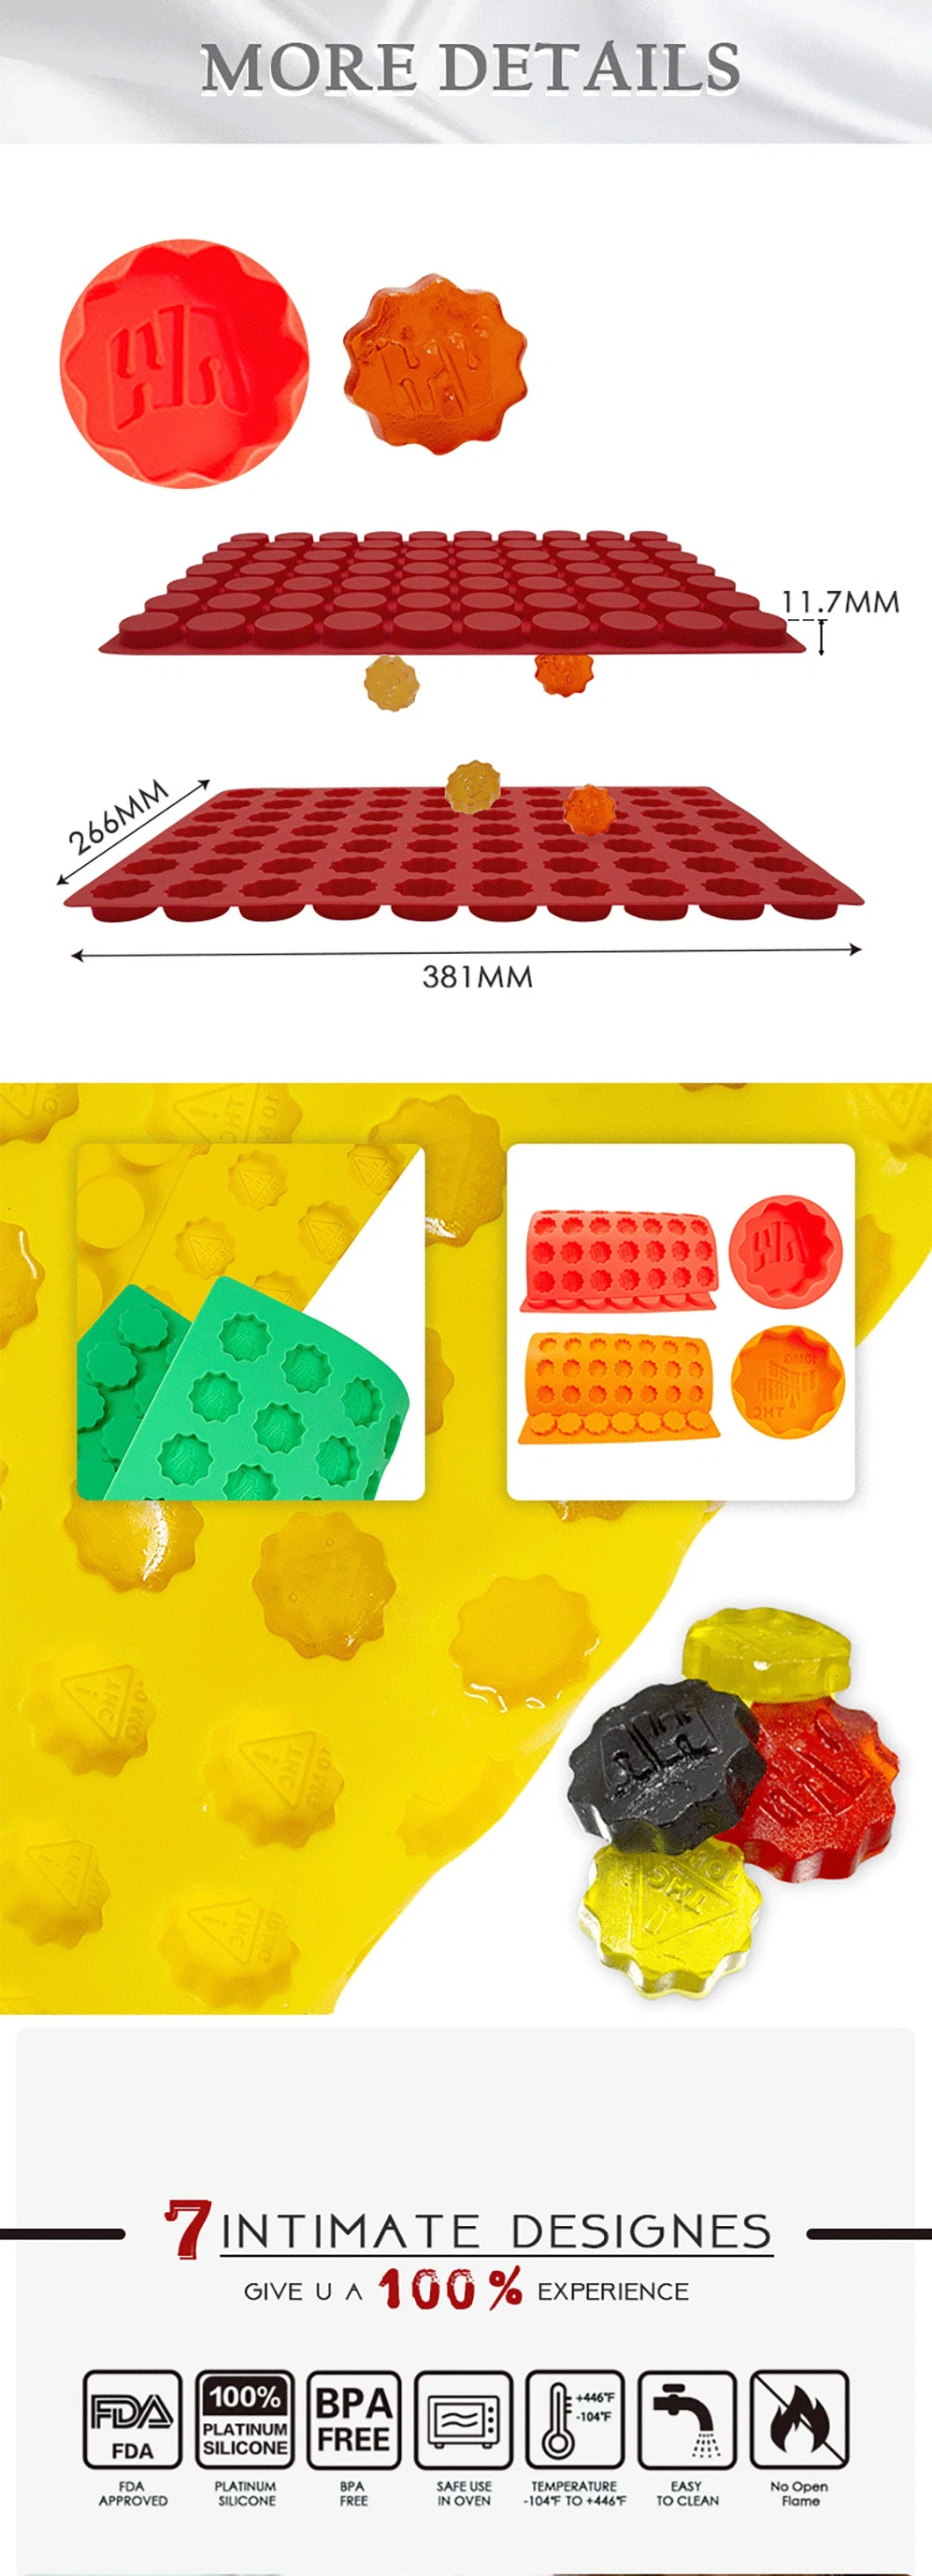 Silicone Mold 12 Even Chocolate Mold Fondant Molds DIY Candy Bar Mould Cake Decoration Tools Kitchen Baking Accessories